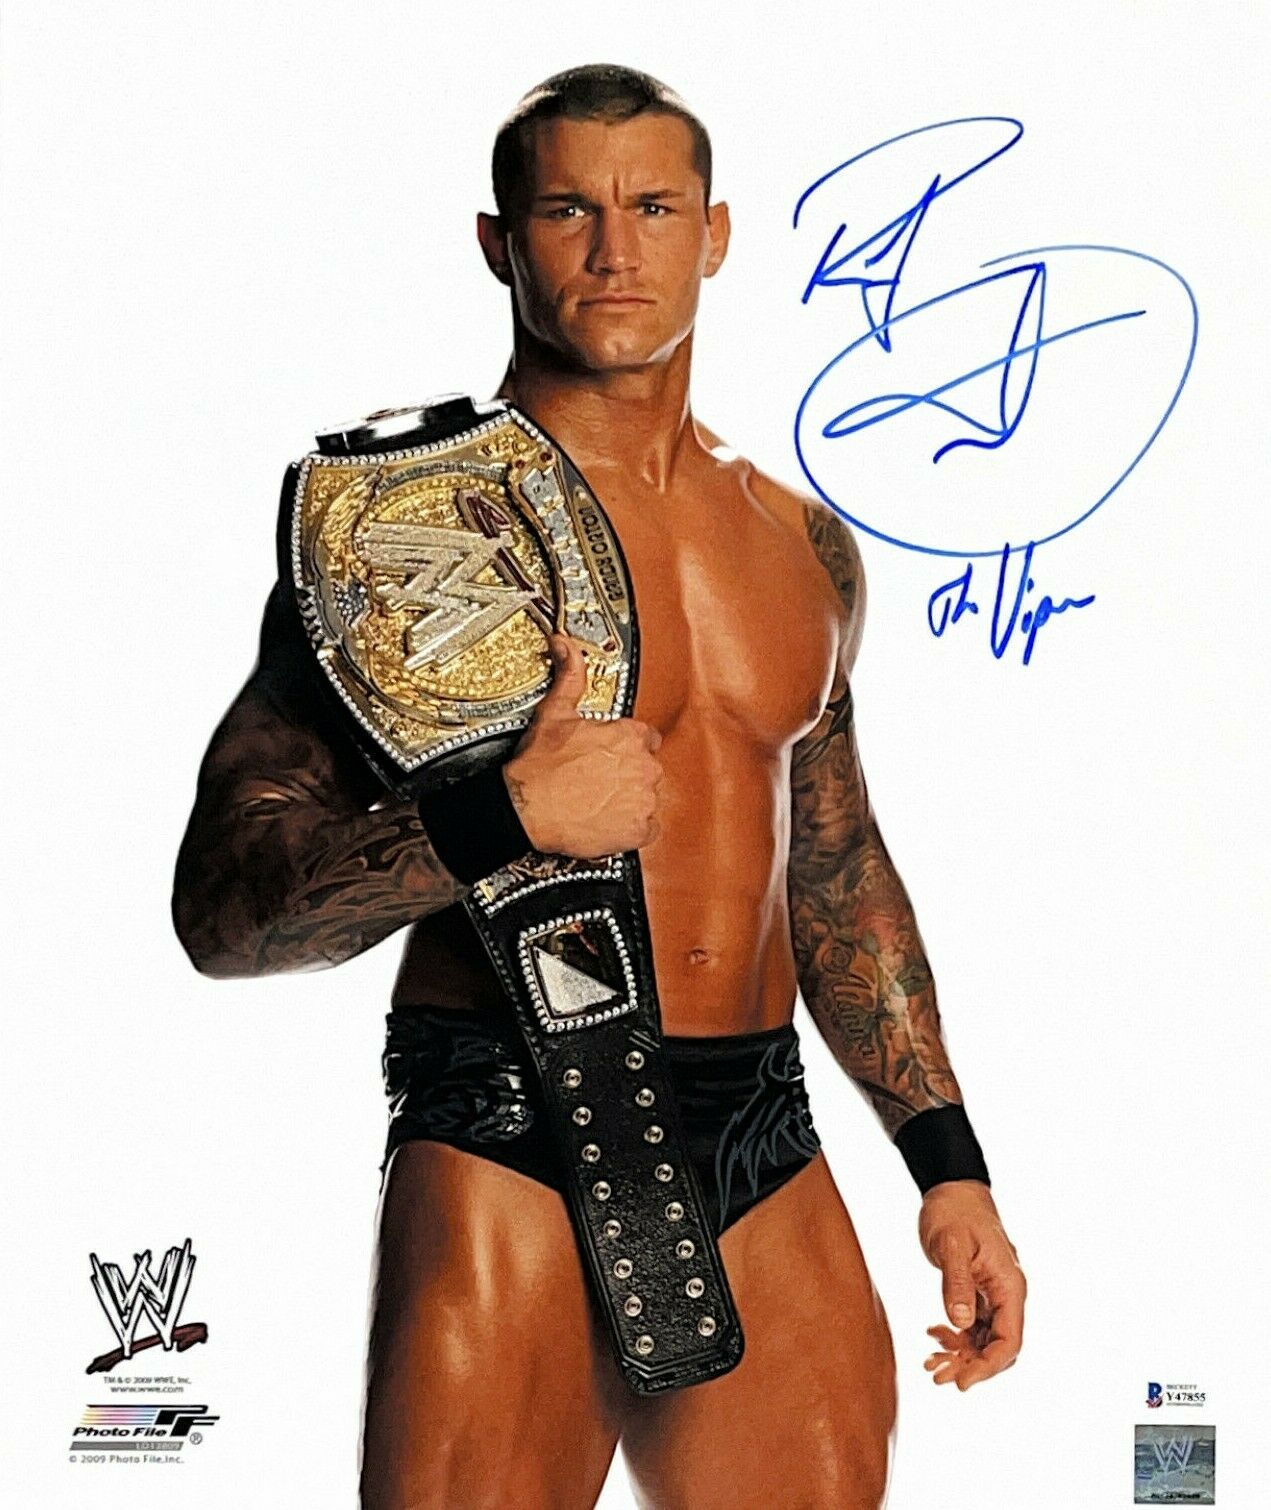 WWE RANDY ORTON HAND SIGNED AUTOGRAPHED 16X20 PHOTO WITH PROOF AND BECKETT COA 2